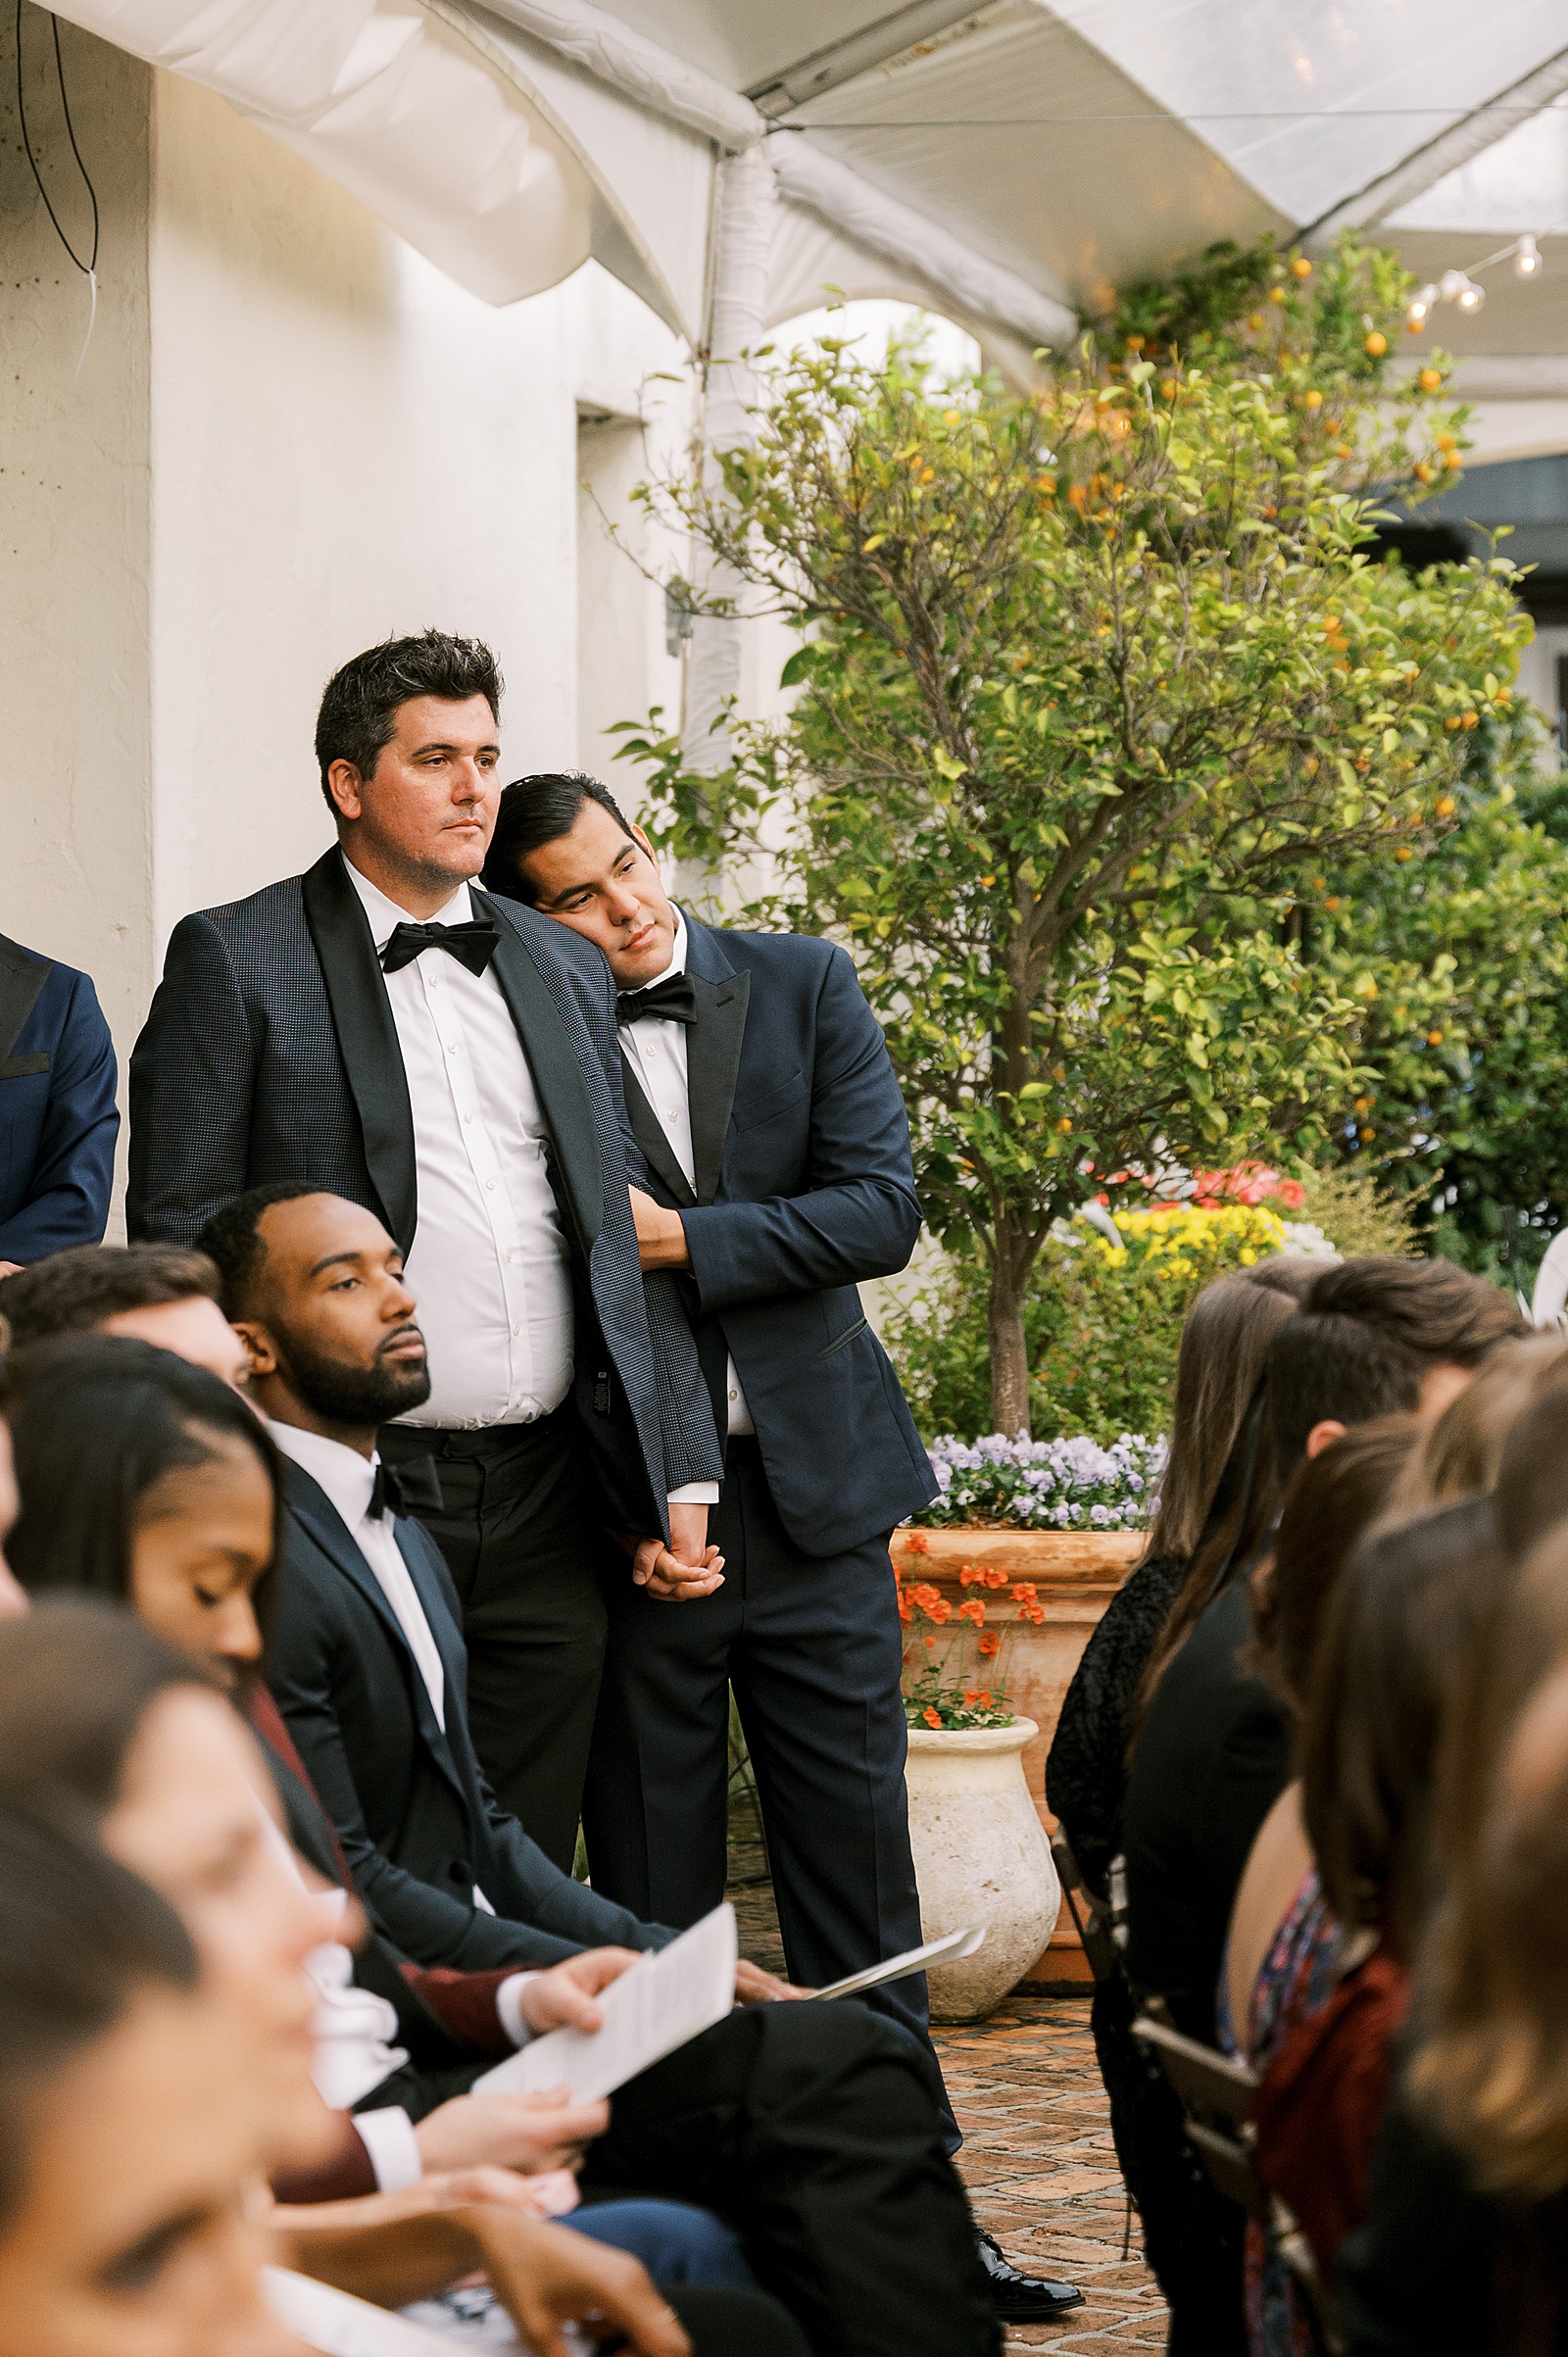 Two wedding guests lean on each other while they watch a wedding ceremony at a historic wedding venue.